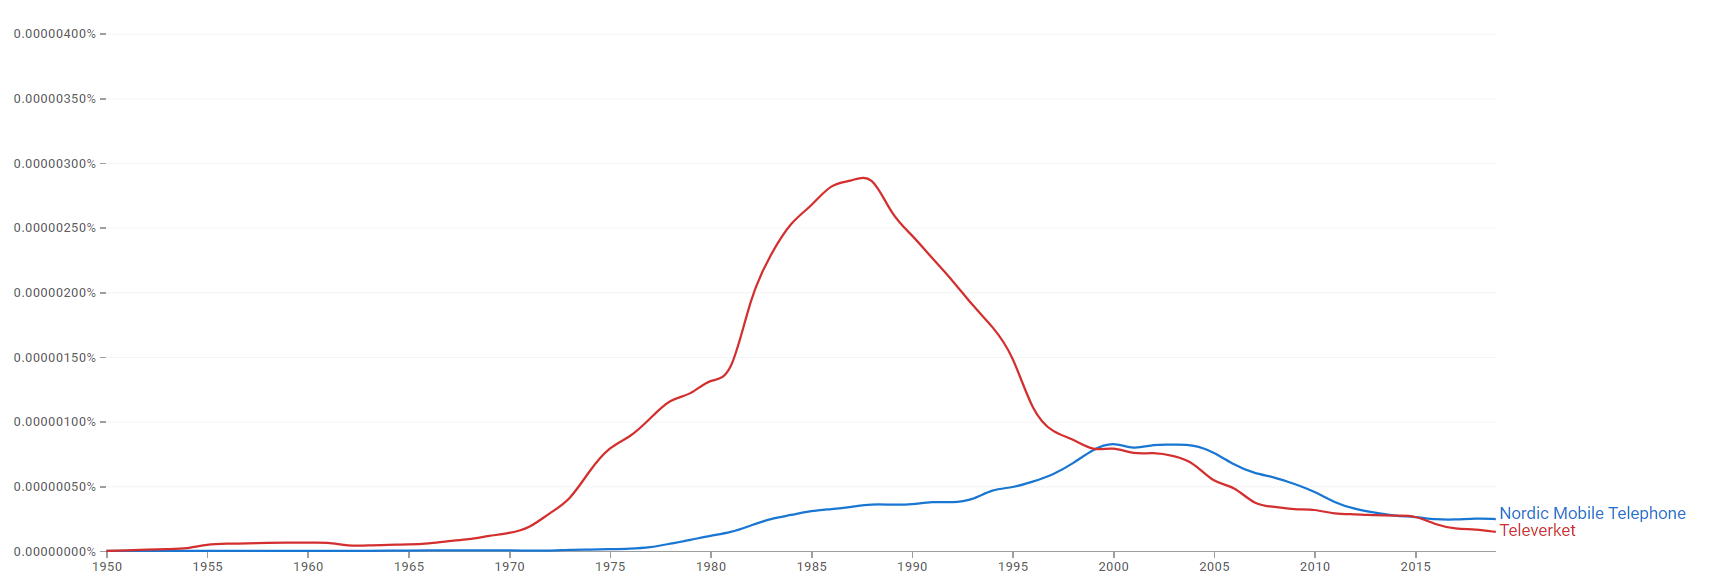 Nordic Mobile Telephone and Televerket ngram.png